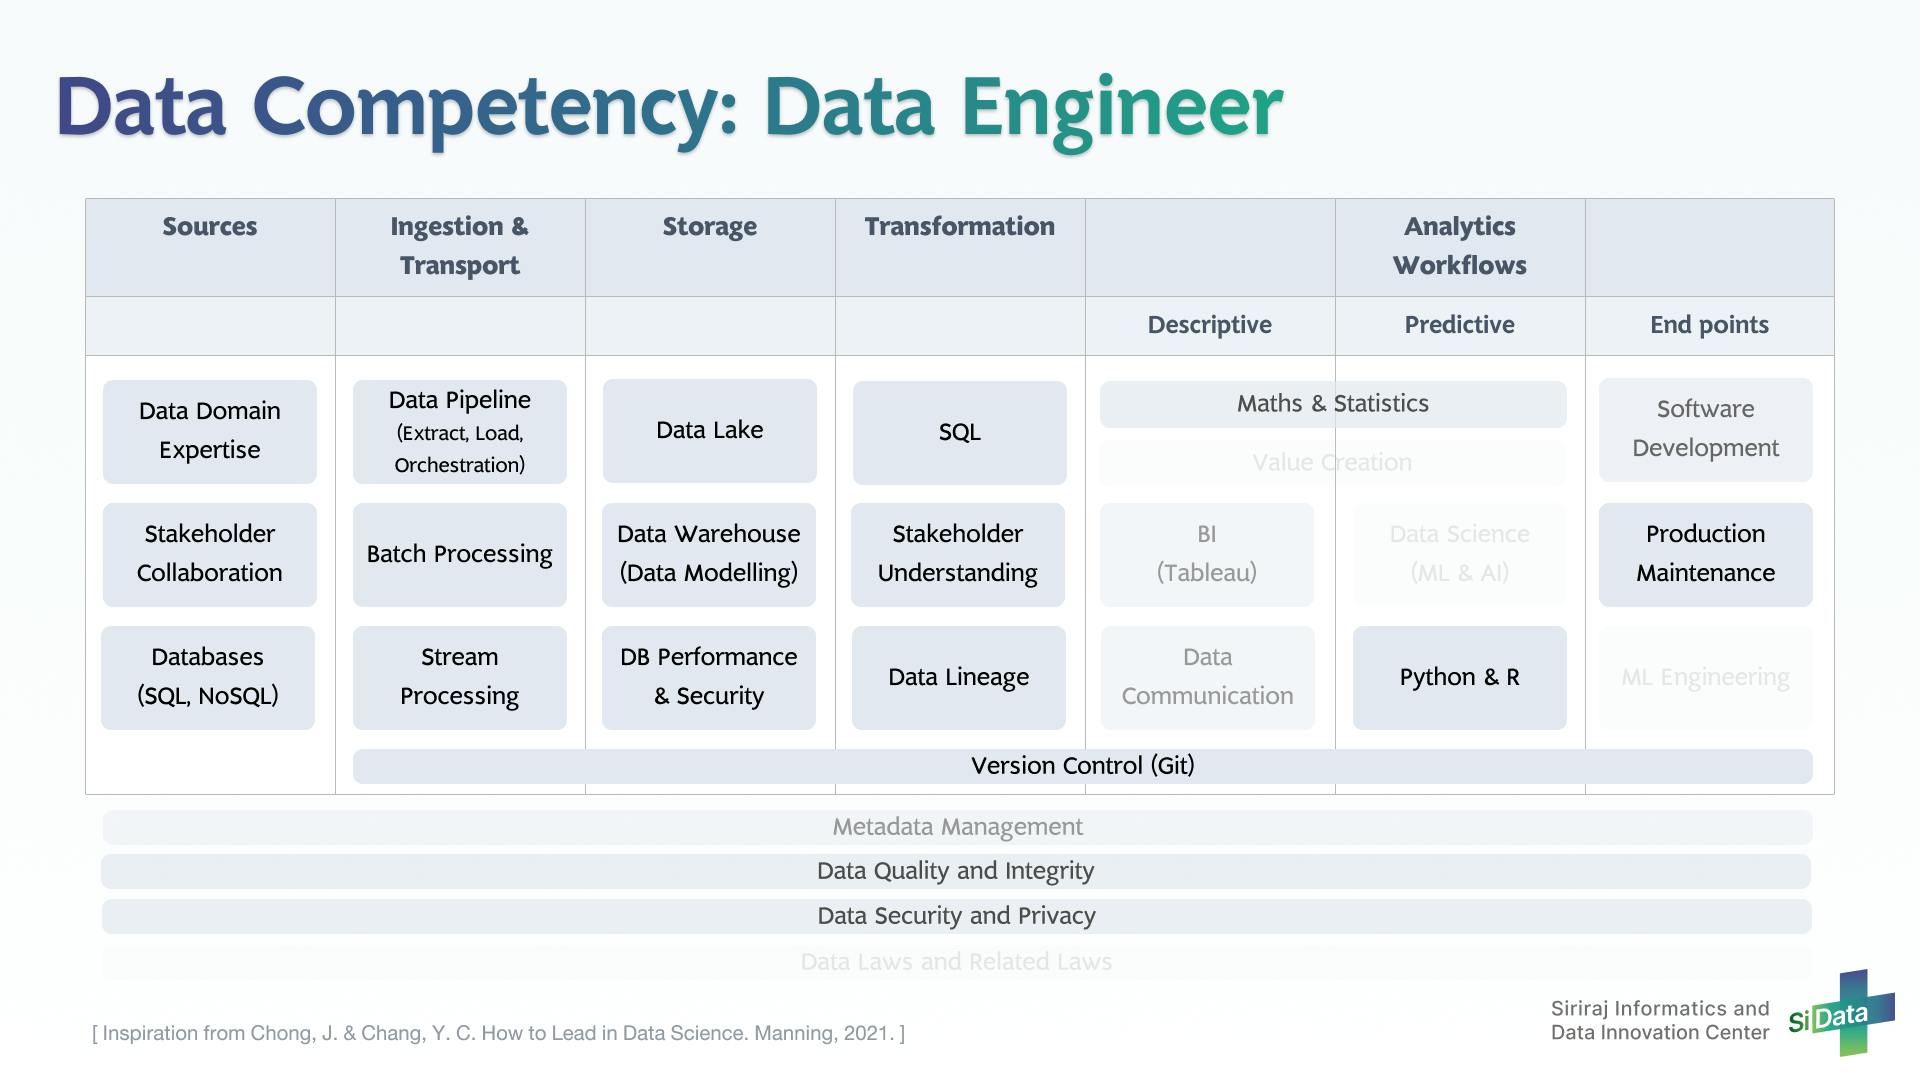 Data Competency_2 Data Engineer_20220425.png